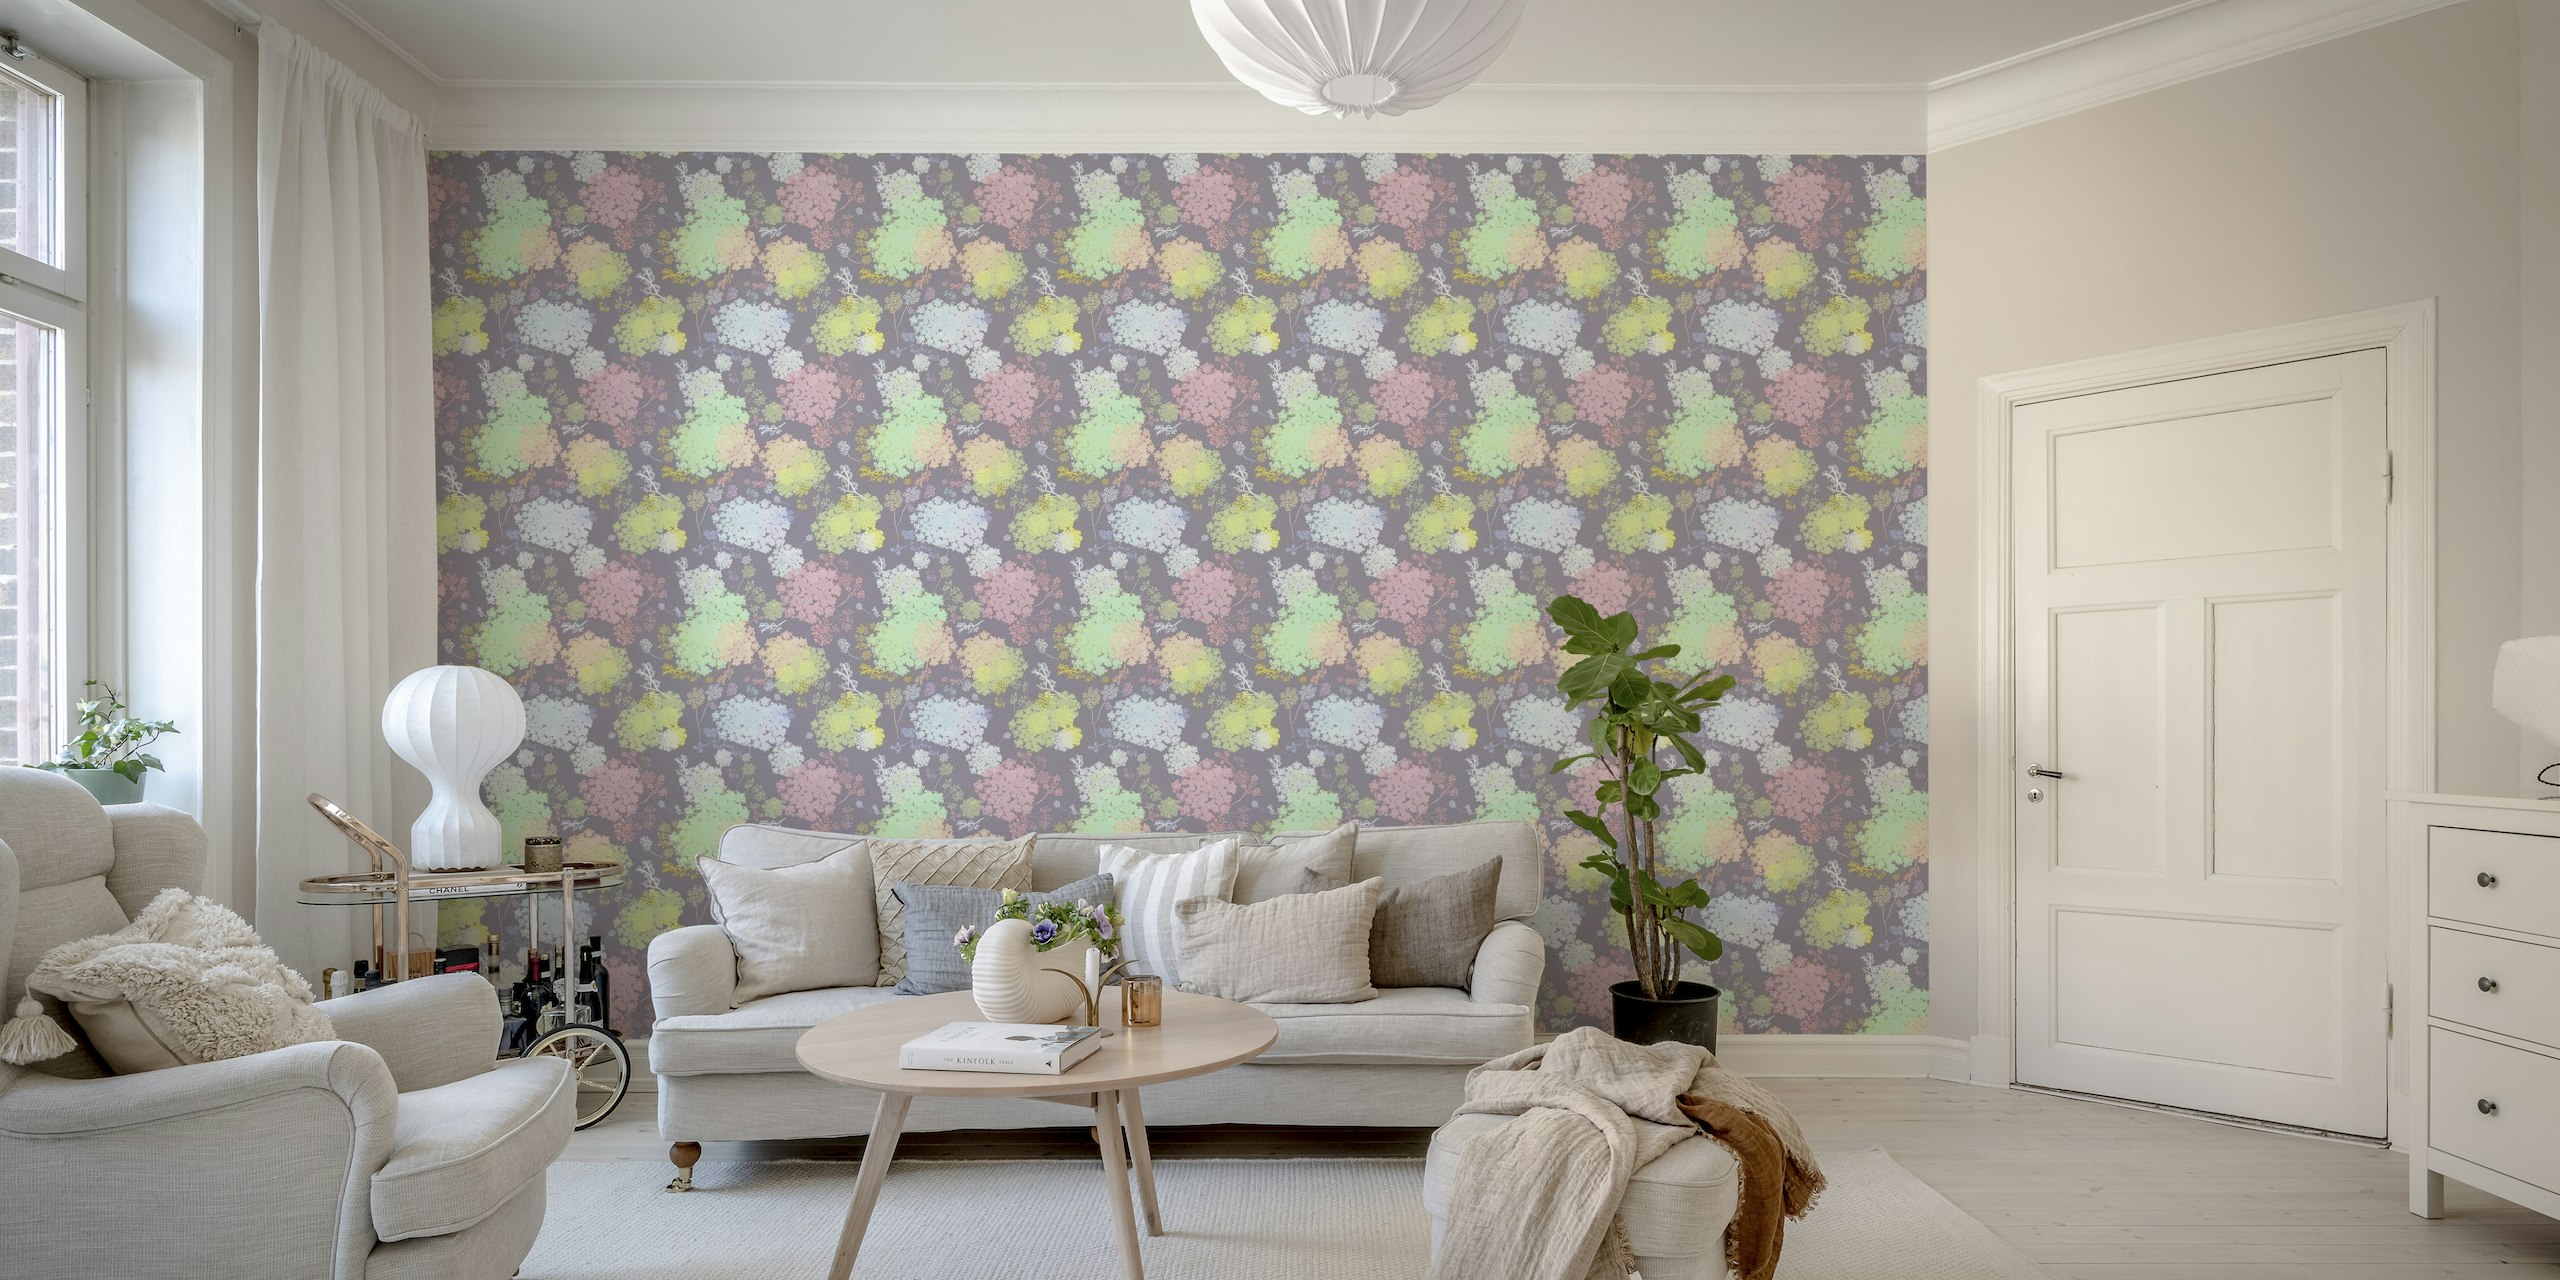 Chic wall mural featuring pastel floral patterns on a dark backdrop with lace-like details